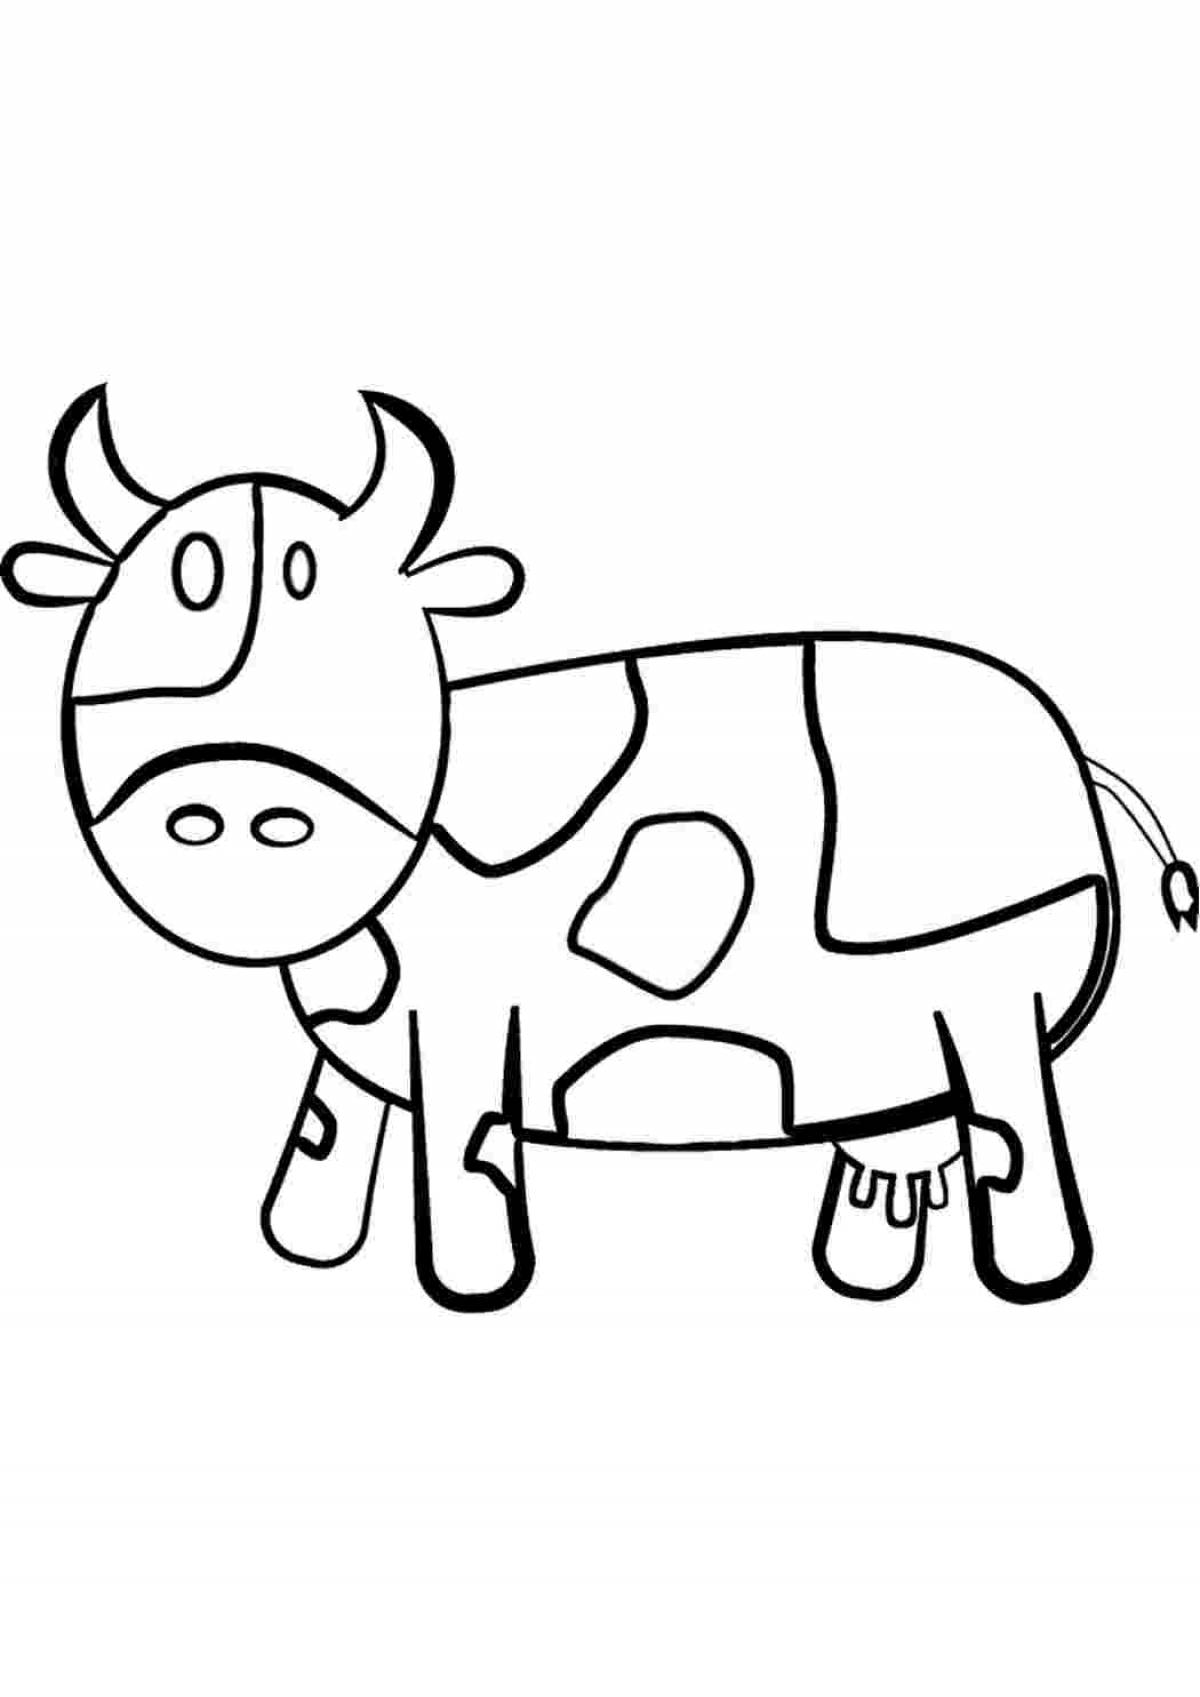 Fantastic cow coloring book for kids 2 3 years old